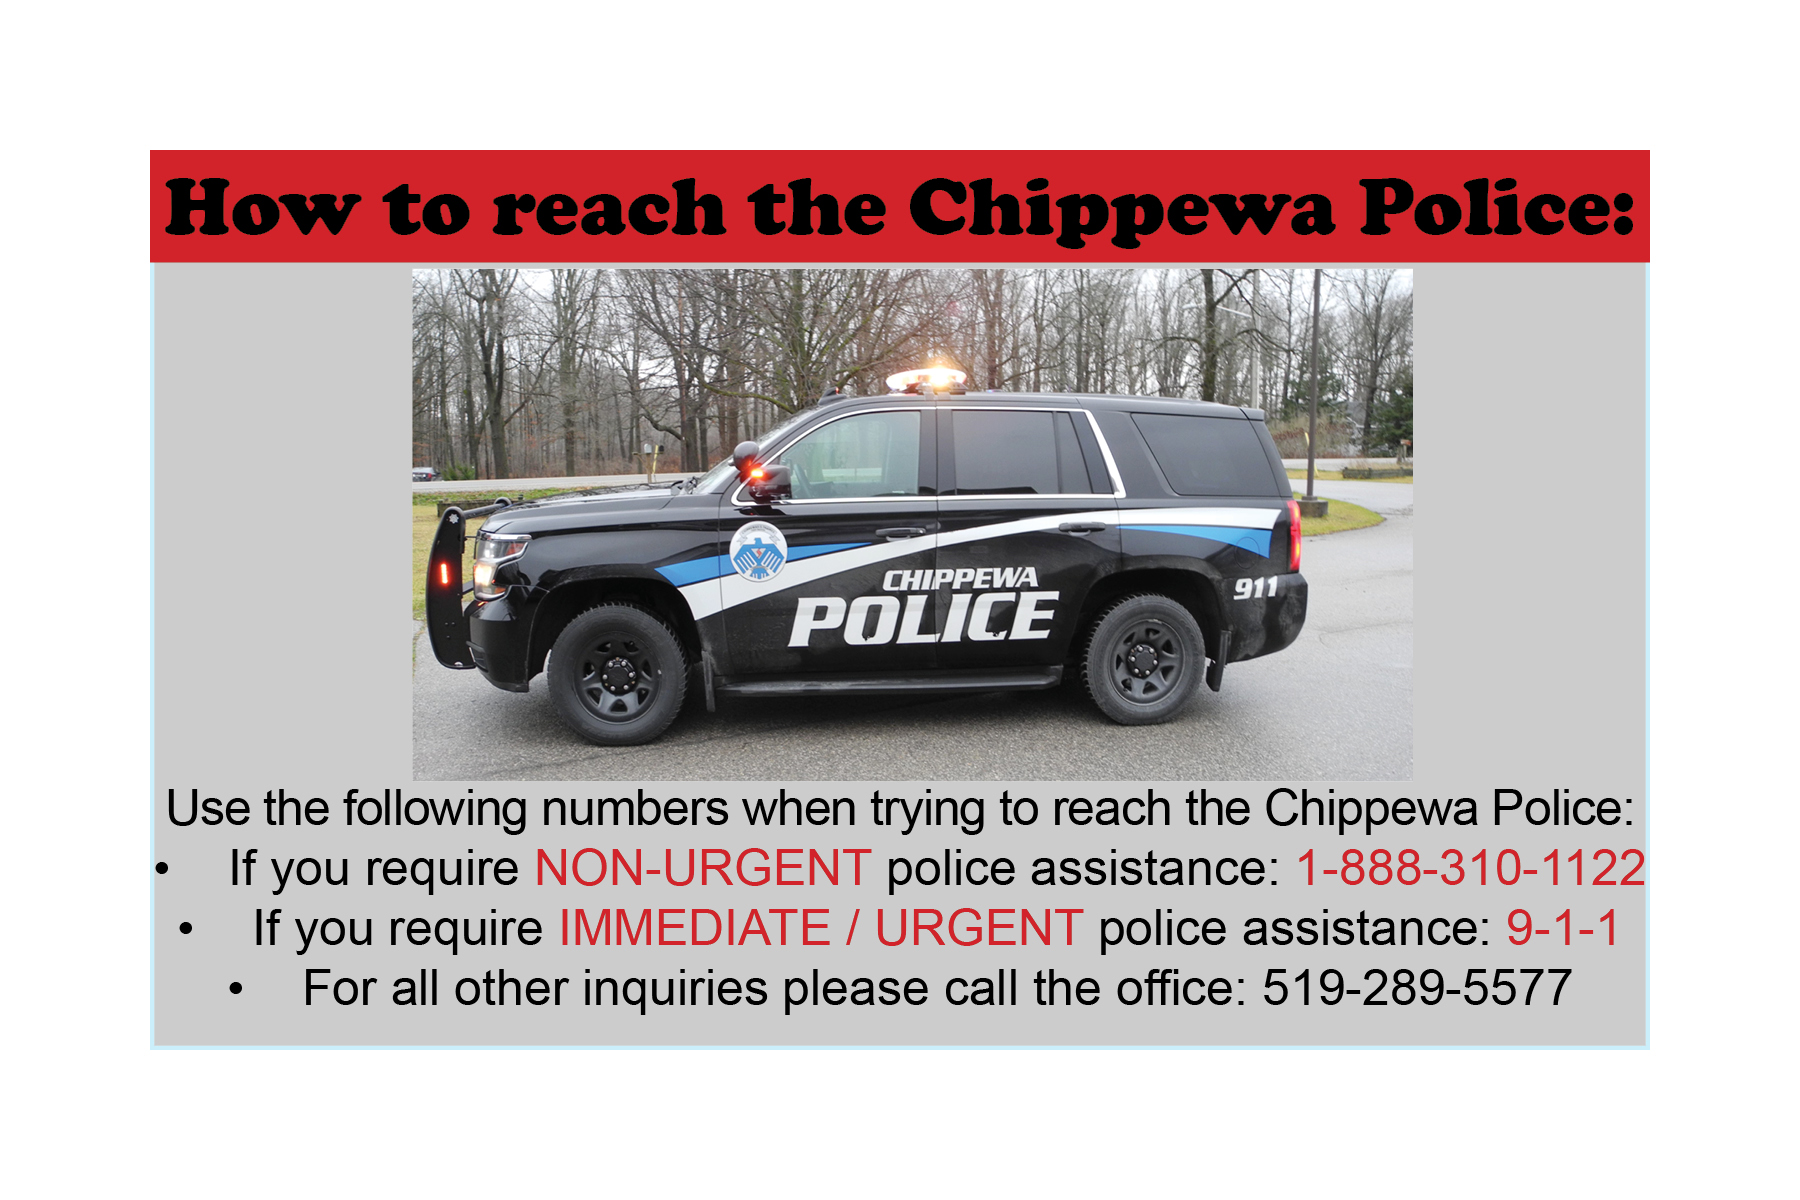 How to reach the Chippewa Police information